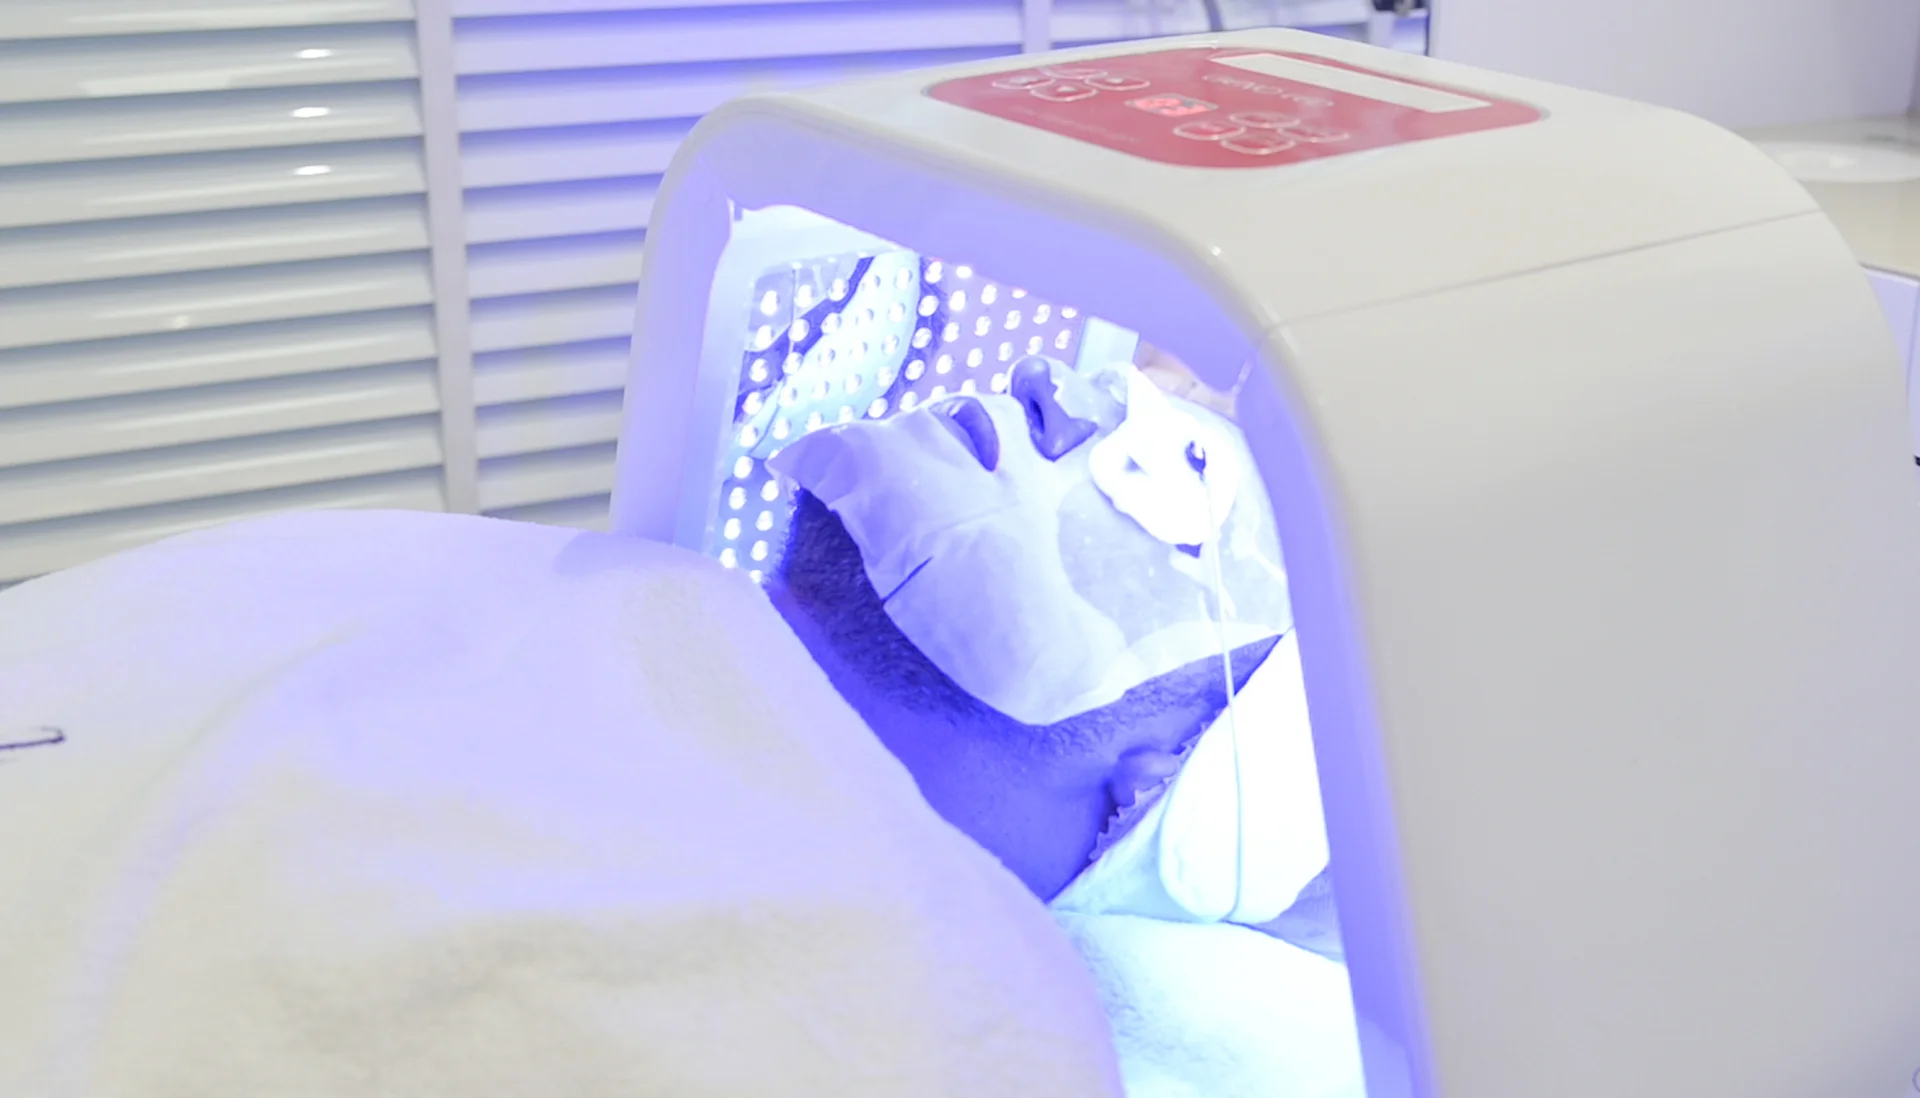 LED mask therapy for smooth, radiant and youthful skin - reduce aging signs, acne, size of pores and other skin blemishes with different LED light therapies.